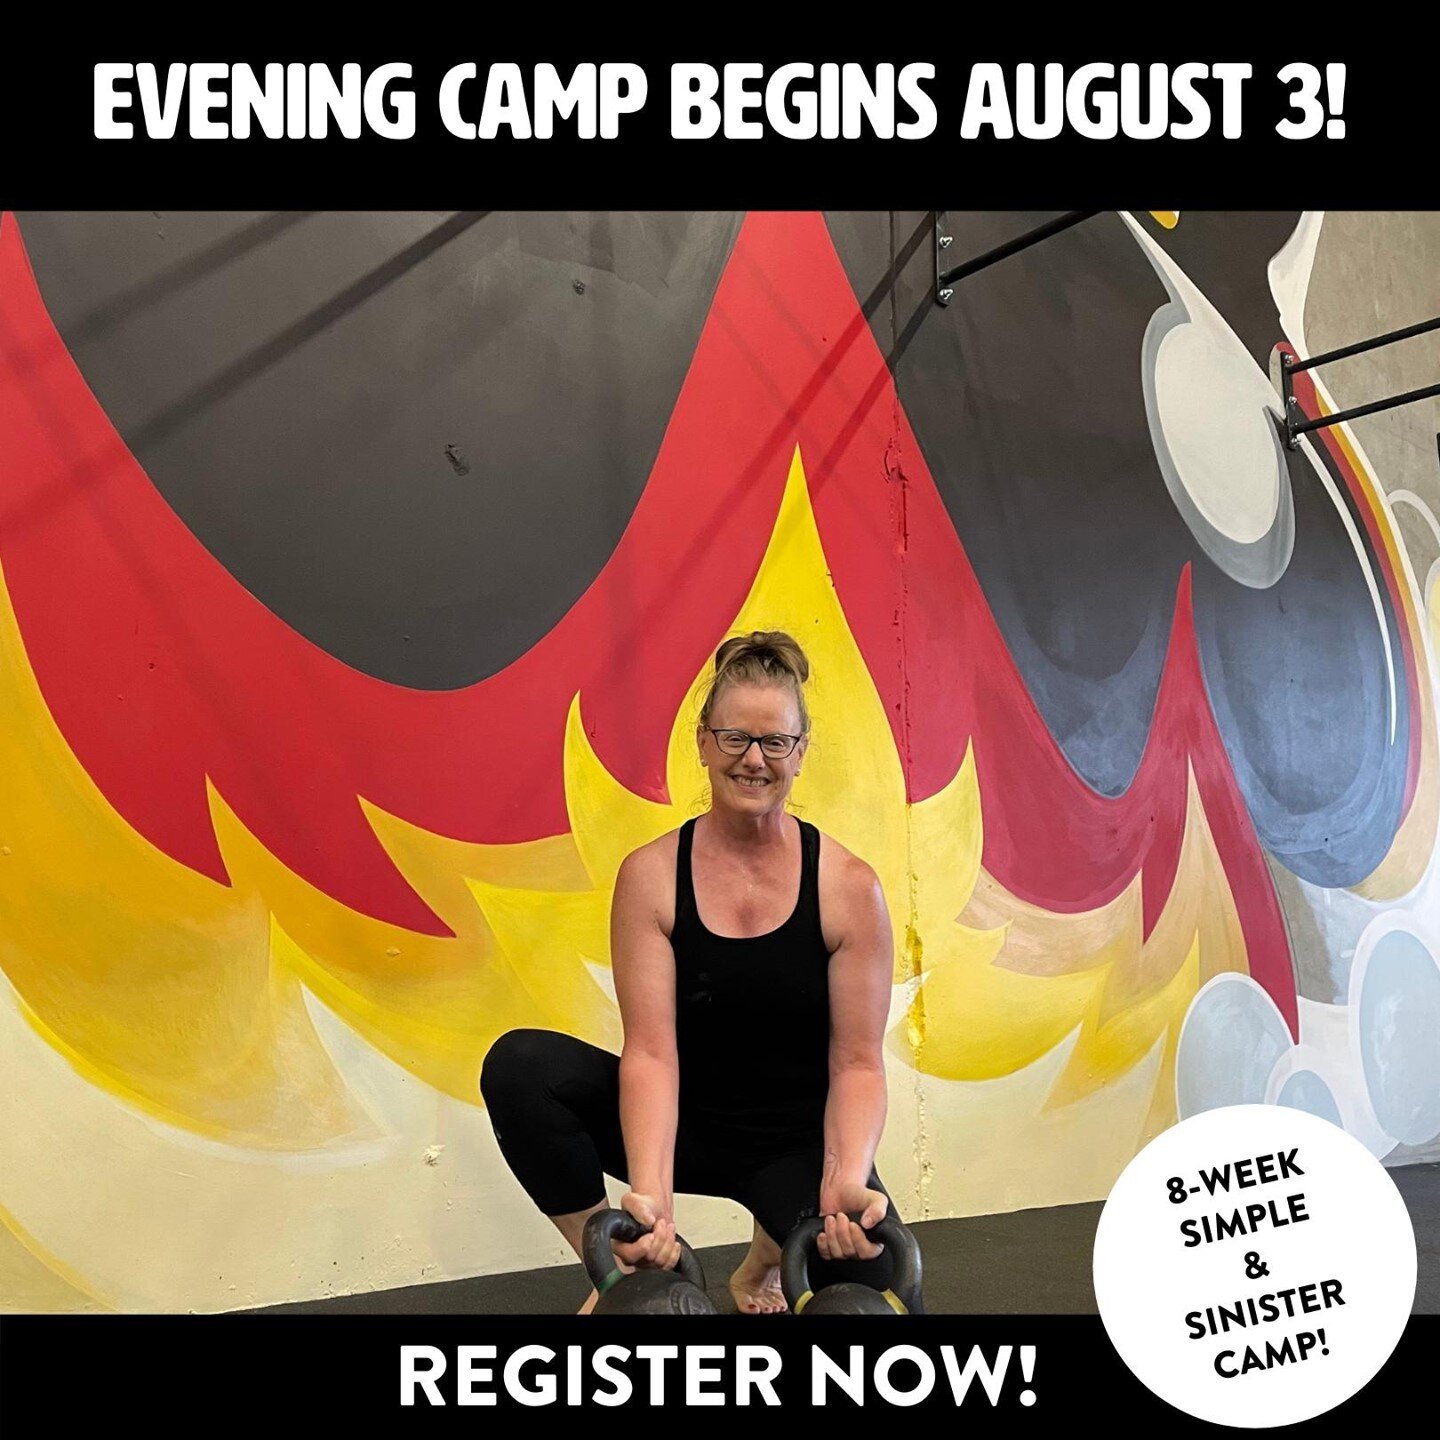 By popular demand...
 
We bring you Simple and Sinister Evening Camp with Coach Brian Hurst @coachbhurst !  So many of you let us know how badly you wanted to be a part of our day camp but just couldn't make the time work. 
 
Well, we listened and no